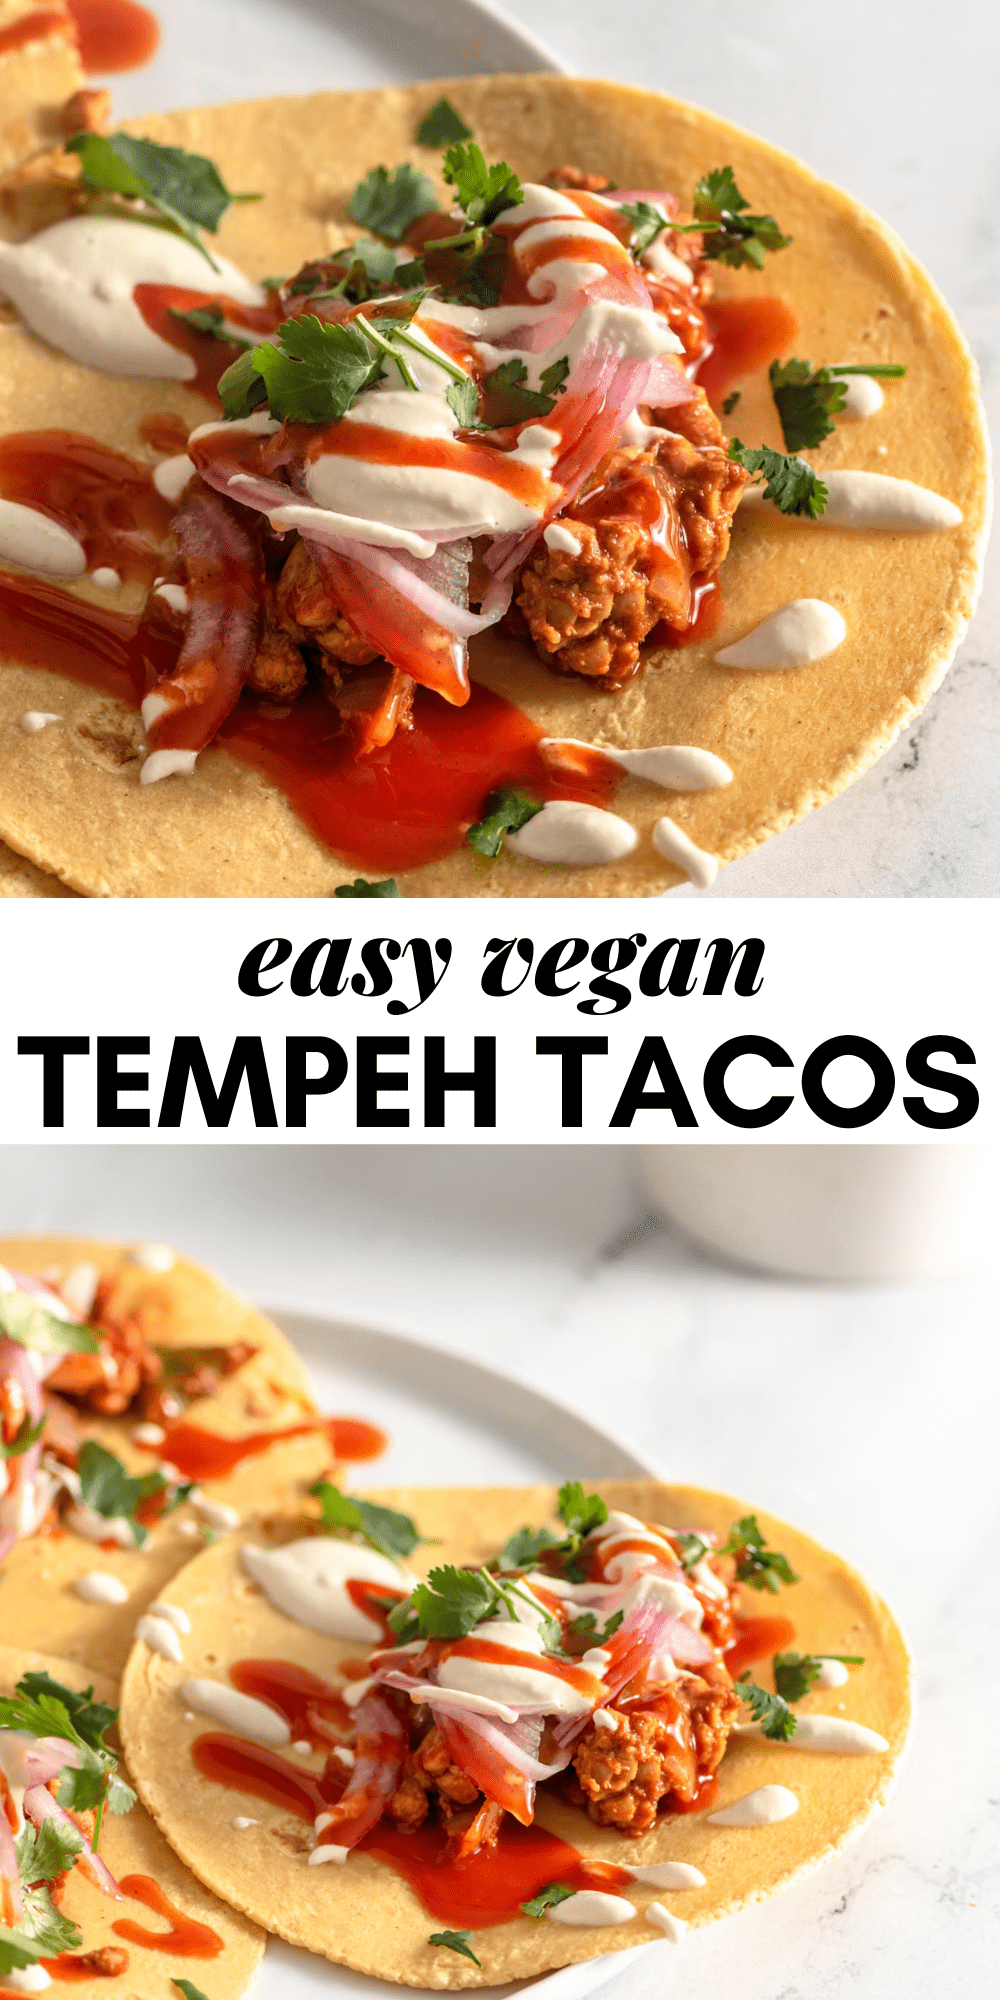 Pinterest graphic with an image and text for vegan tempeh tacos.